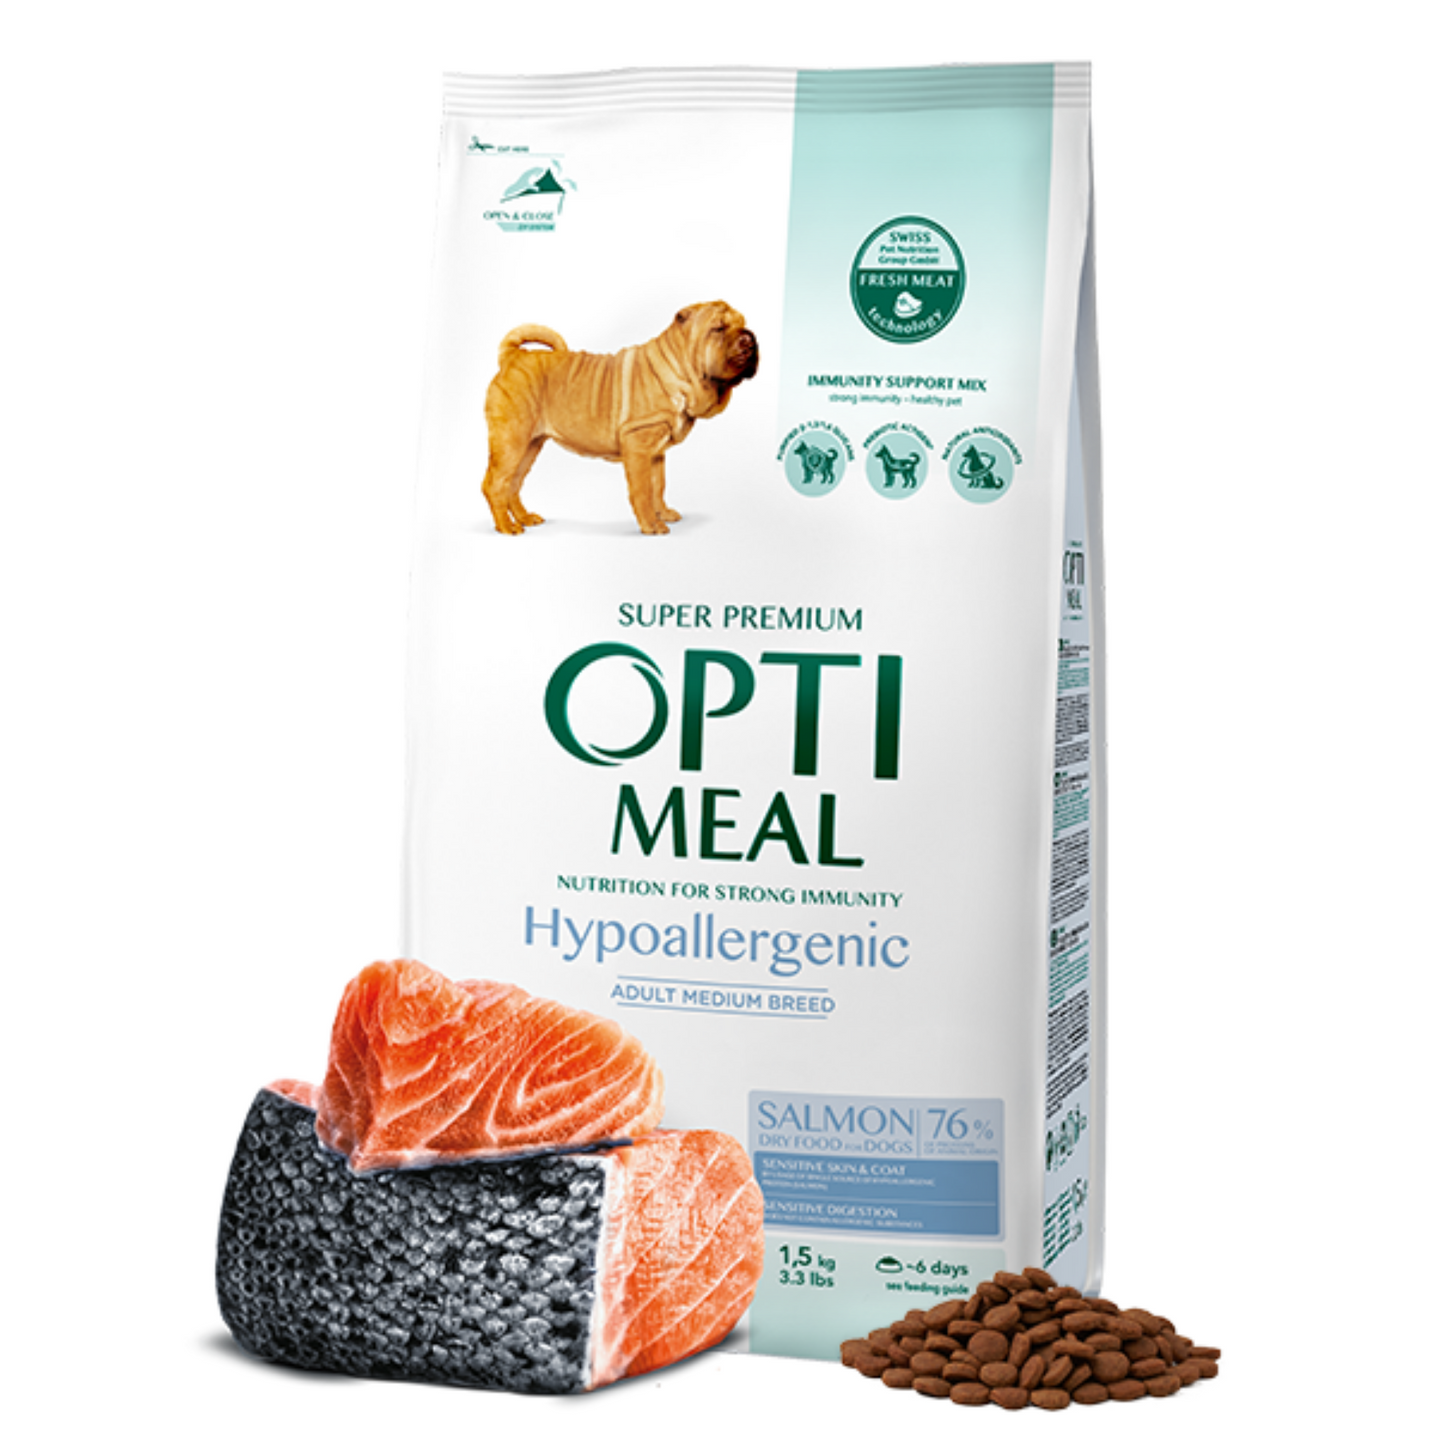 OPTIMEAL Hypoallergenic dry dog food for adult dogs of medium breeds with Salmon